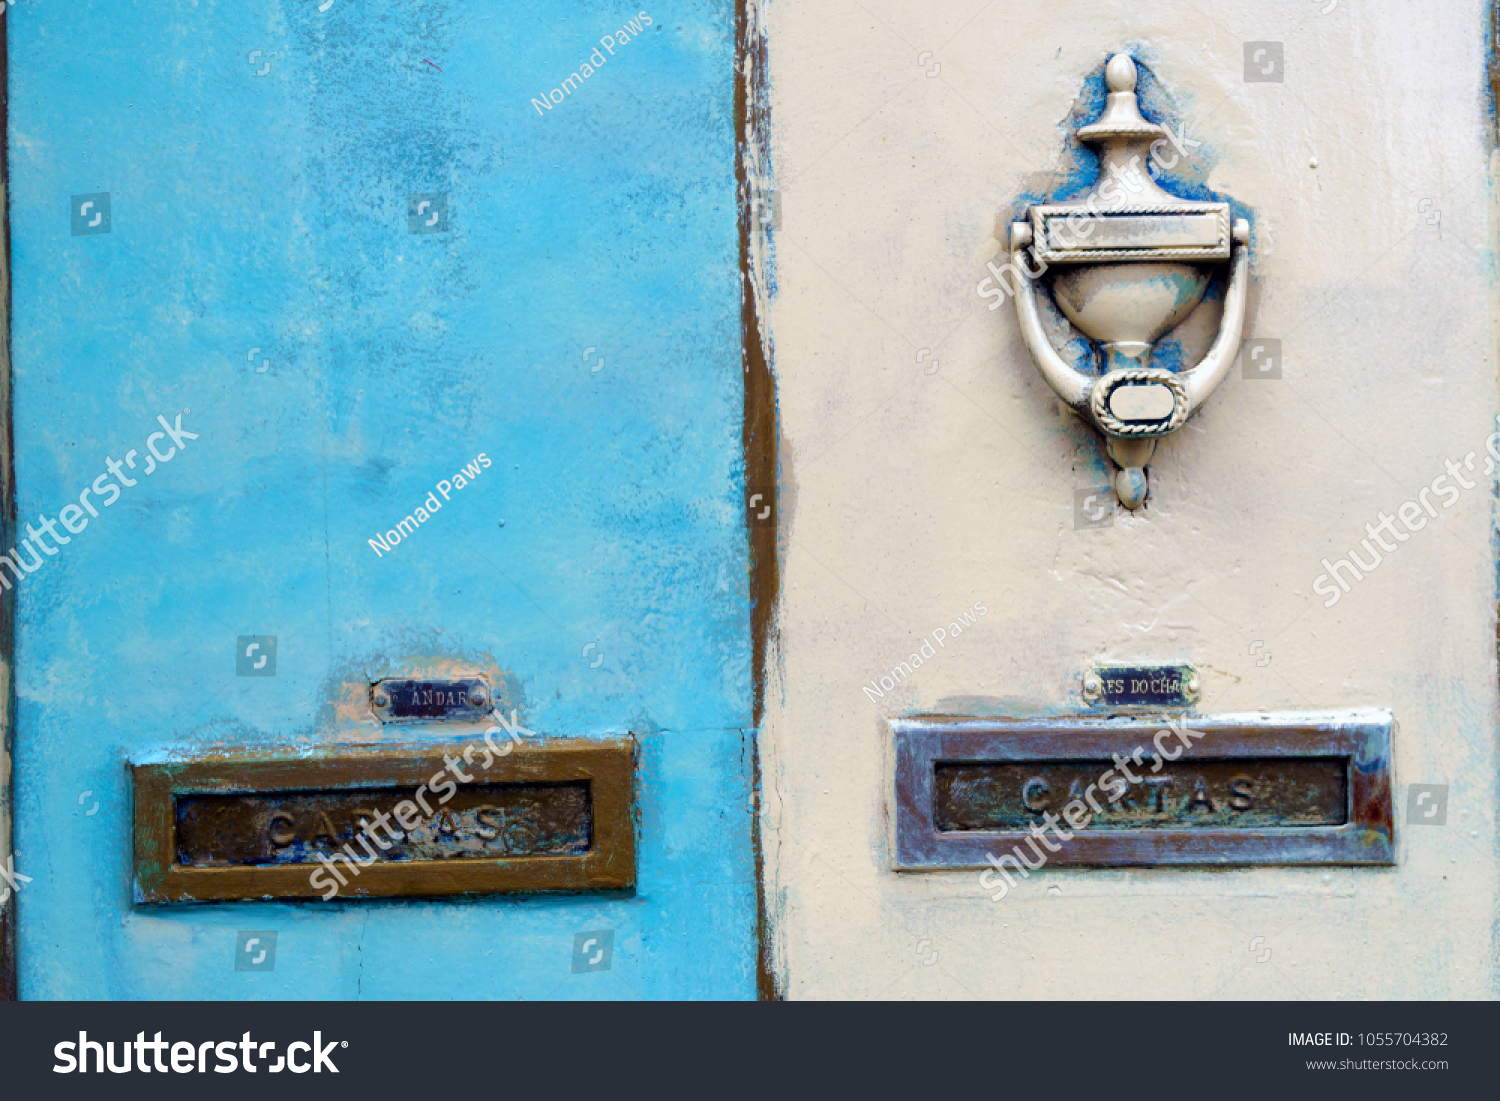 Beautiful Old Metallic Mail Slots at Porto, Portugal with the Portuguese word for "Letters"  "Cartas" #1055704382